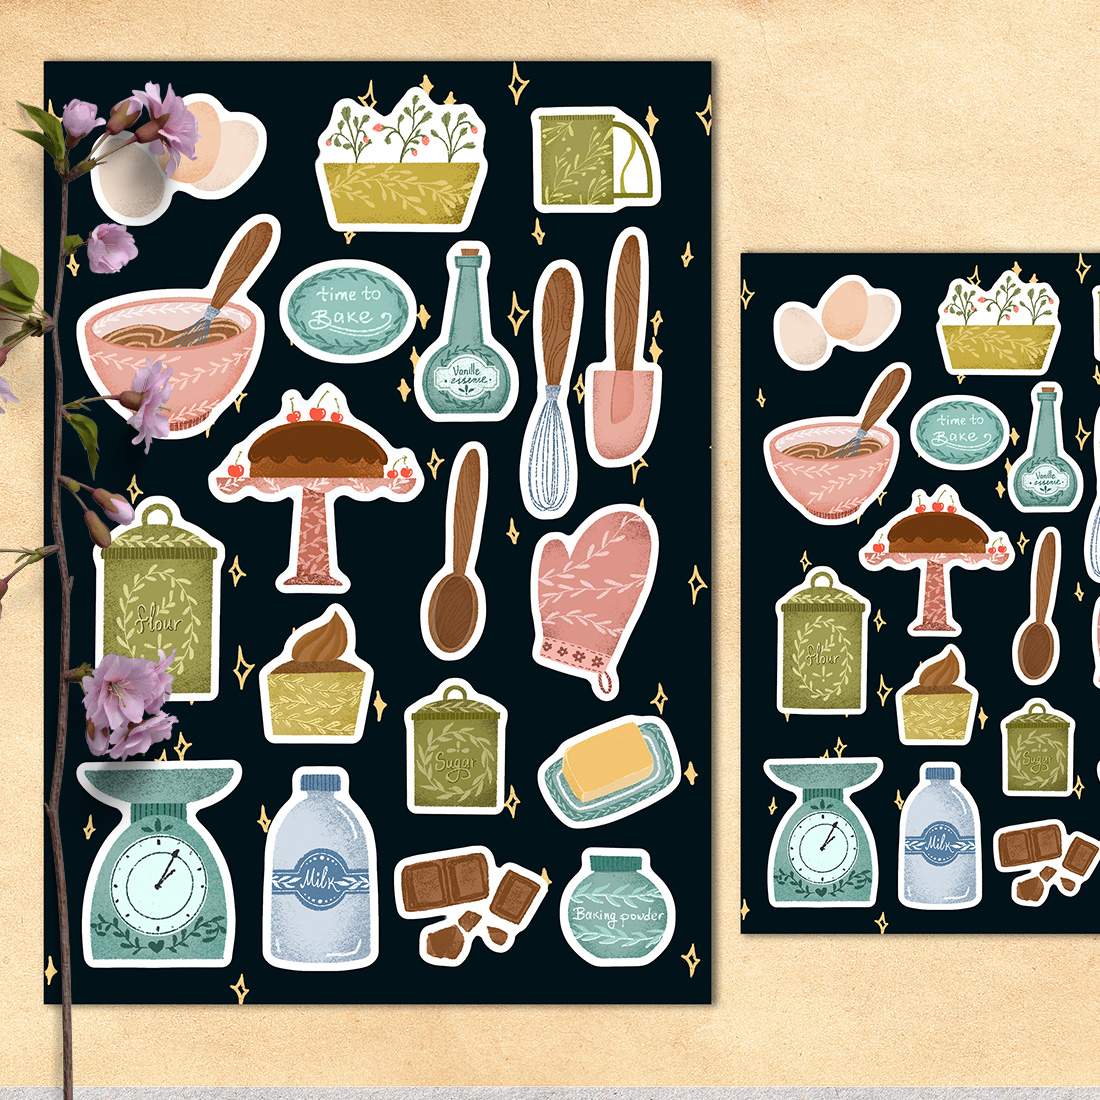 Home bake sticker pack preview image.